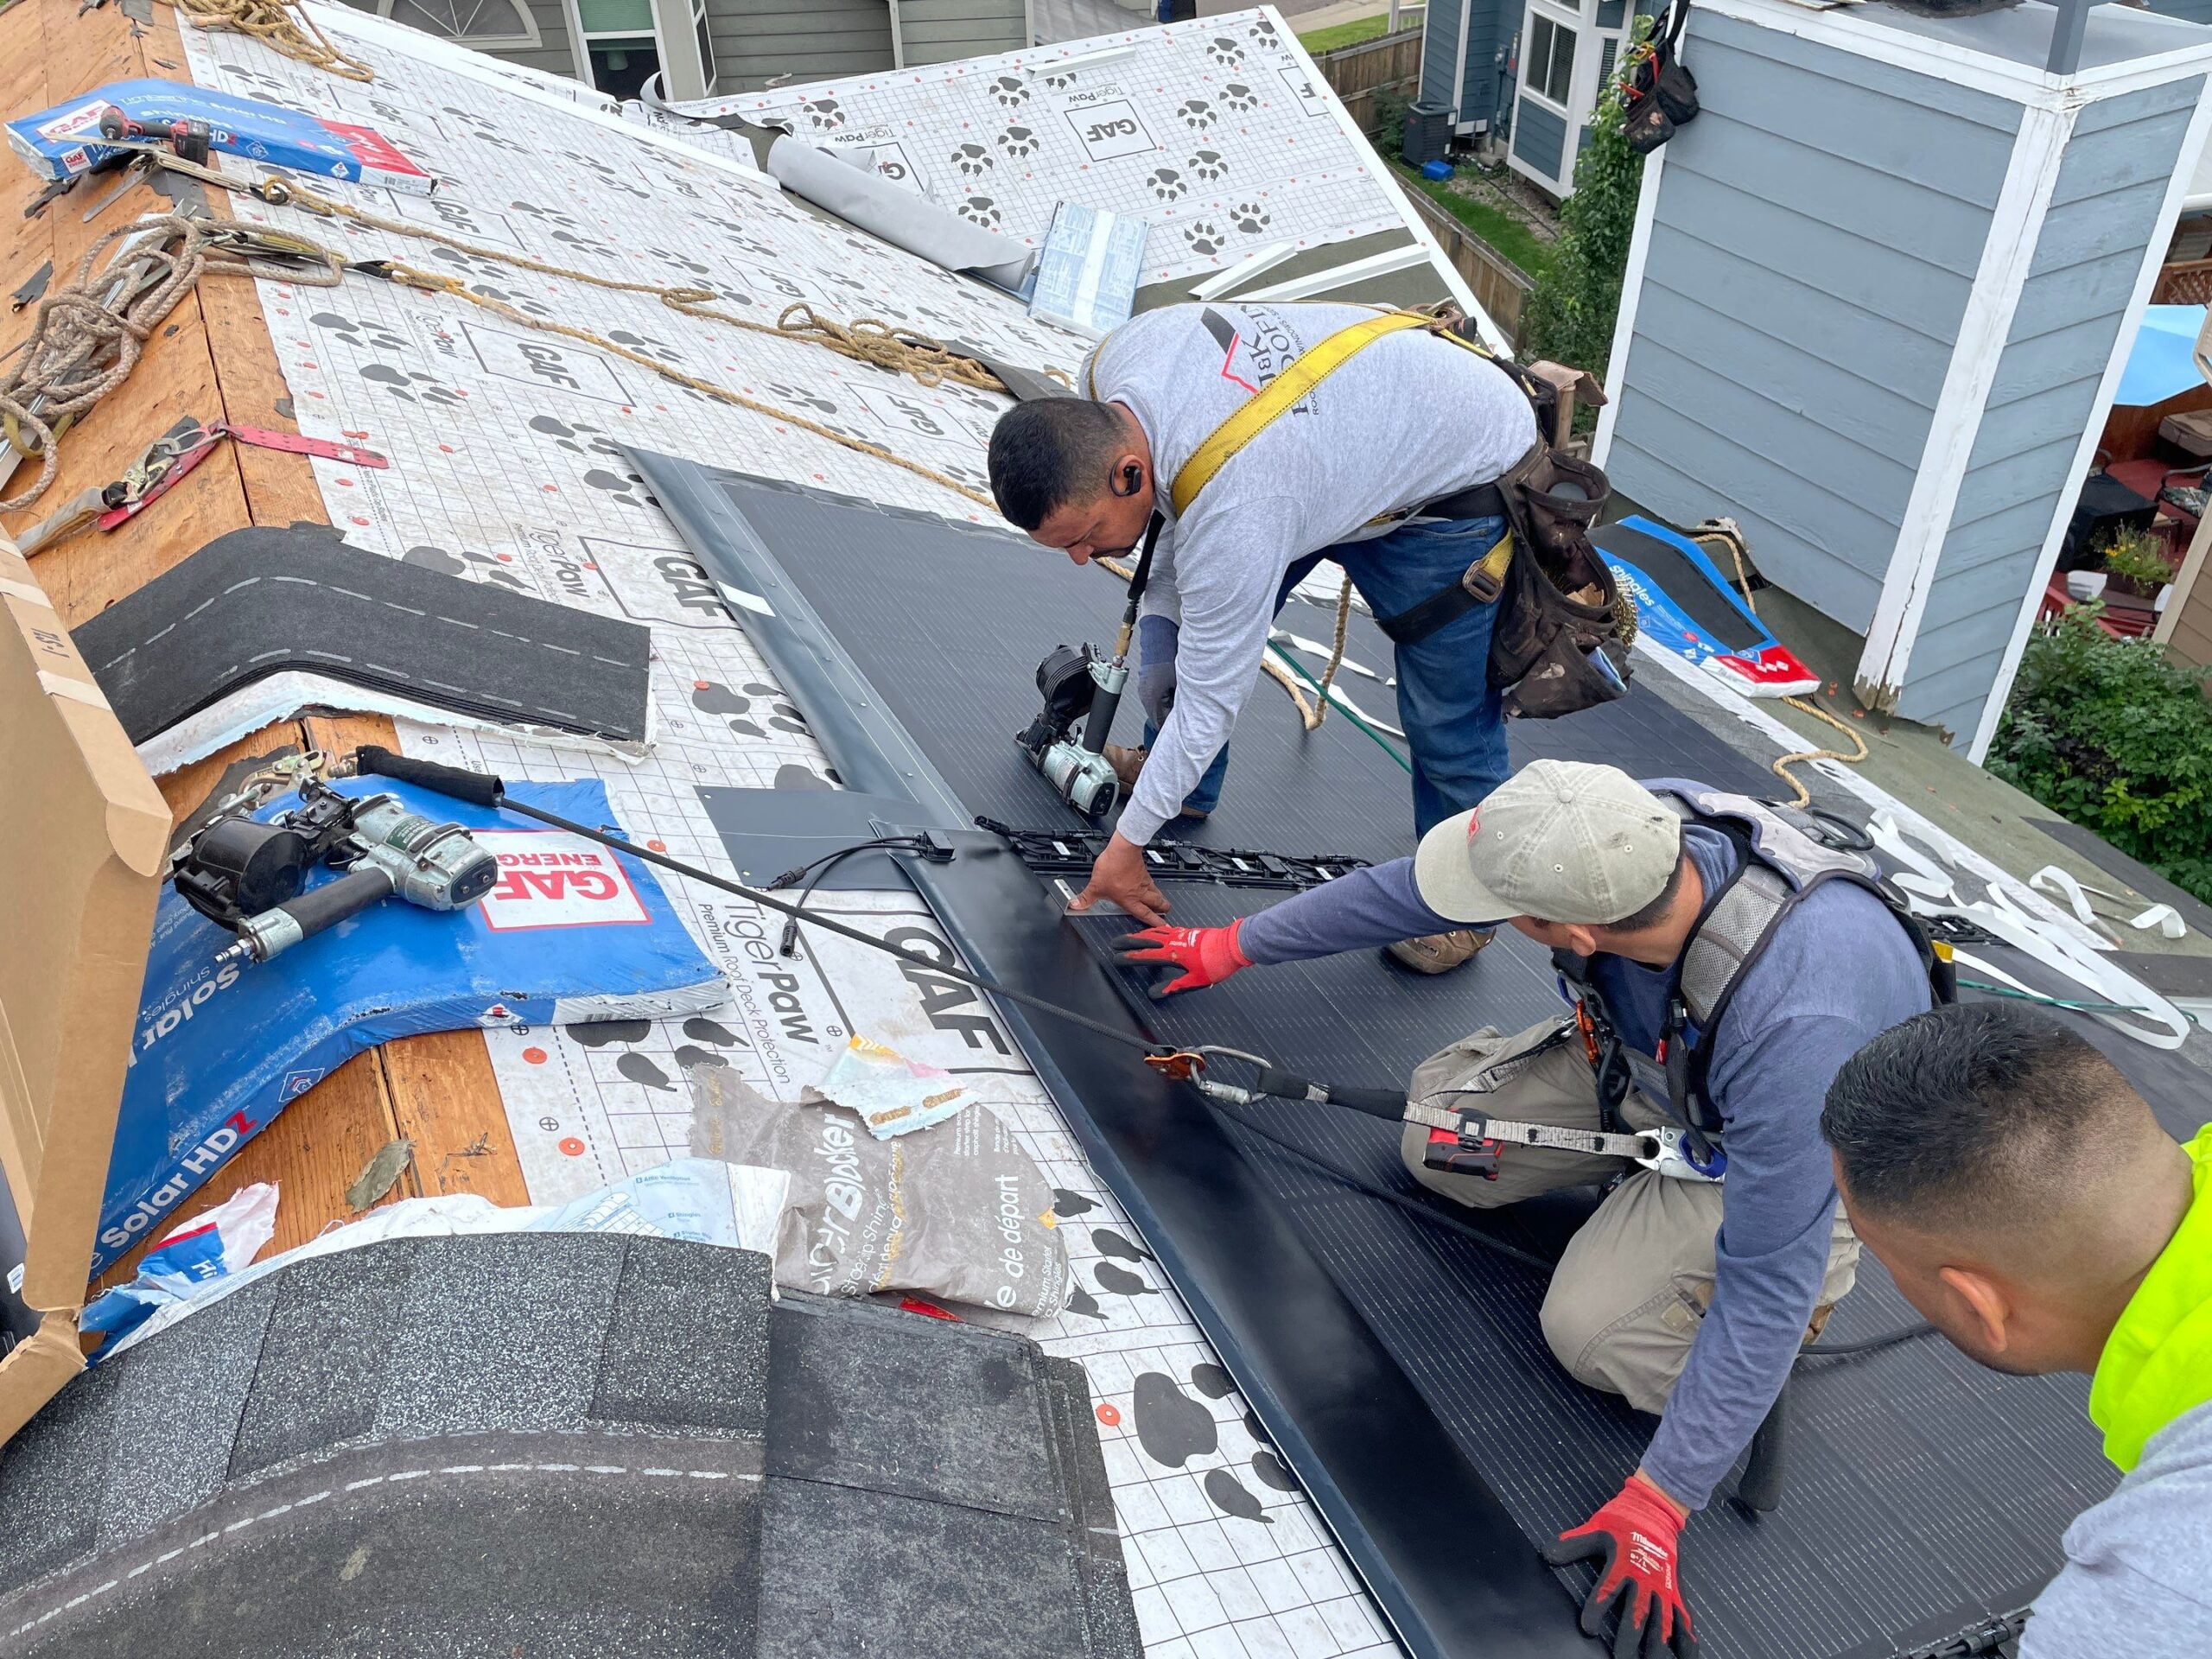 Workers installing solar roofing on a residential home.